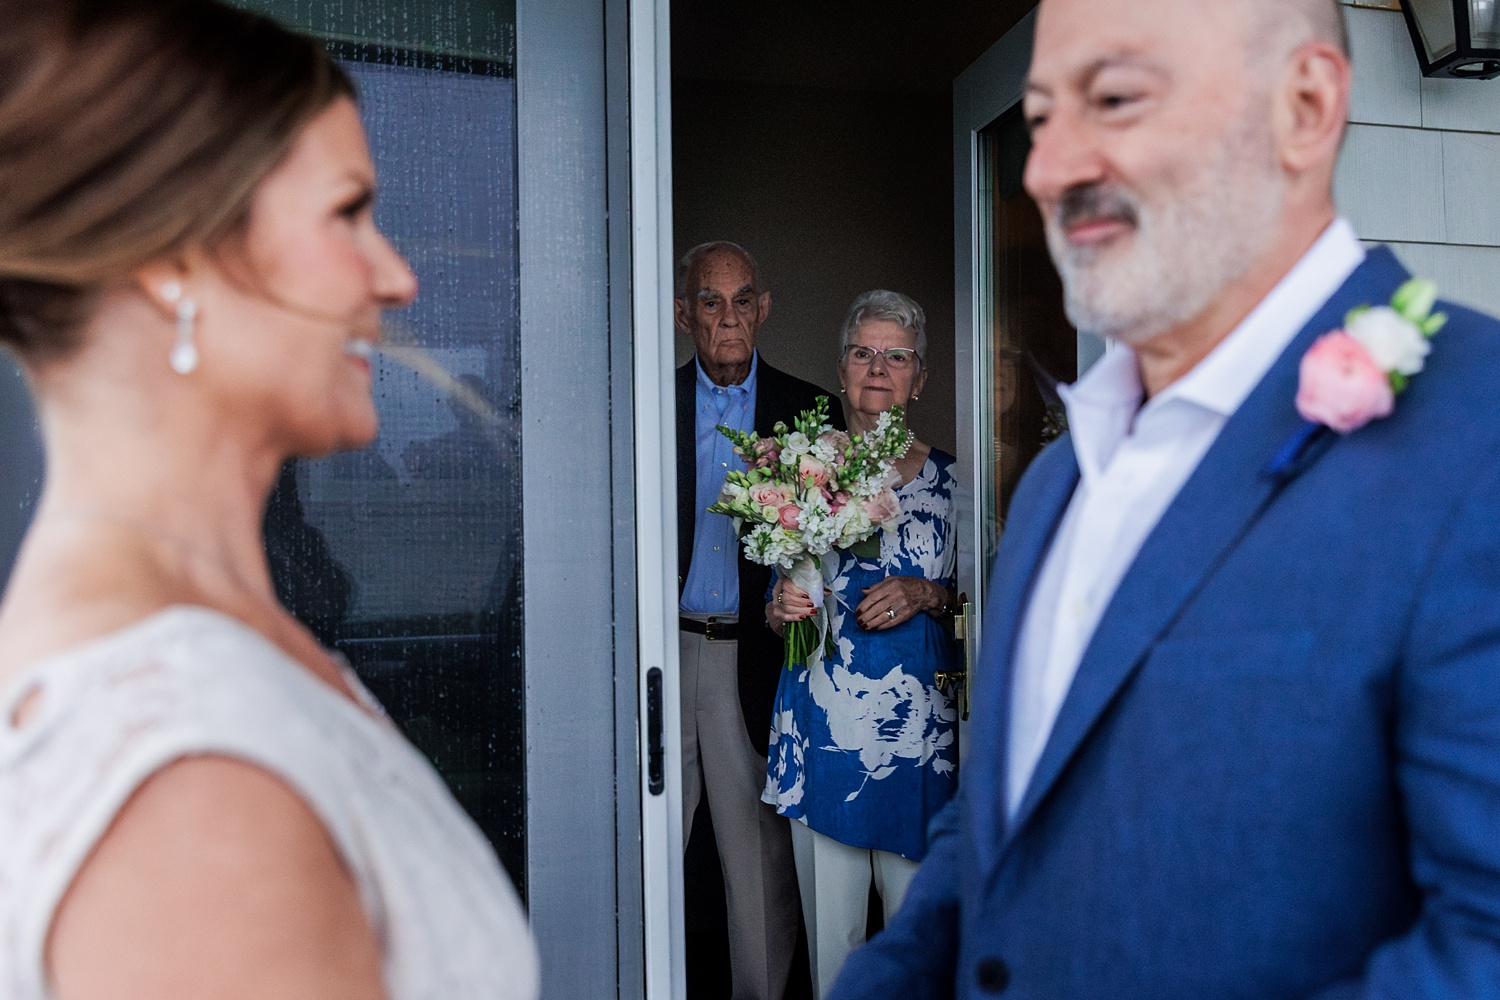 The parents of the bride watch the couple read their vows on the patio of the Beachmere Inn hotel room they used for their elopement in Maine